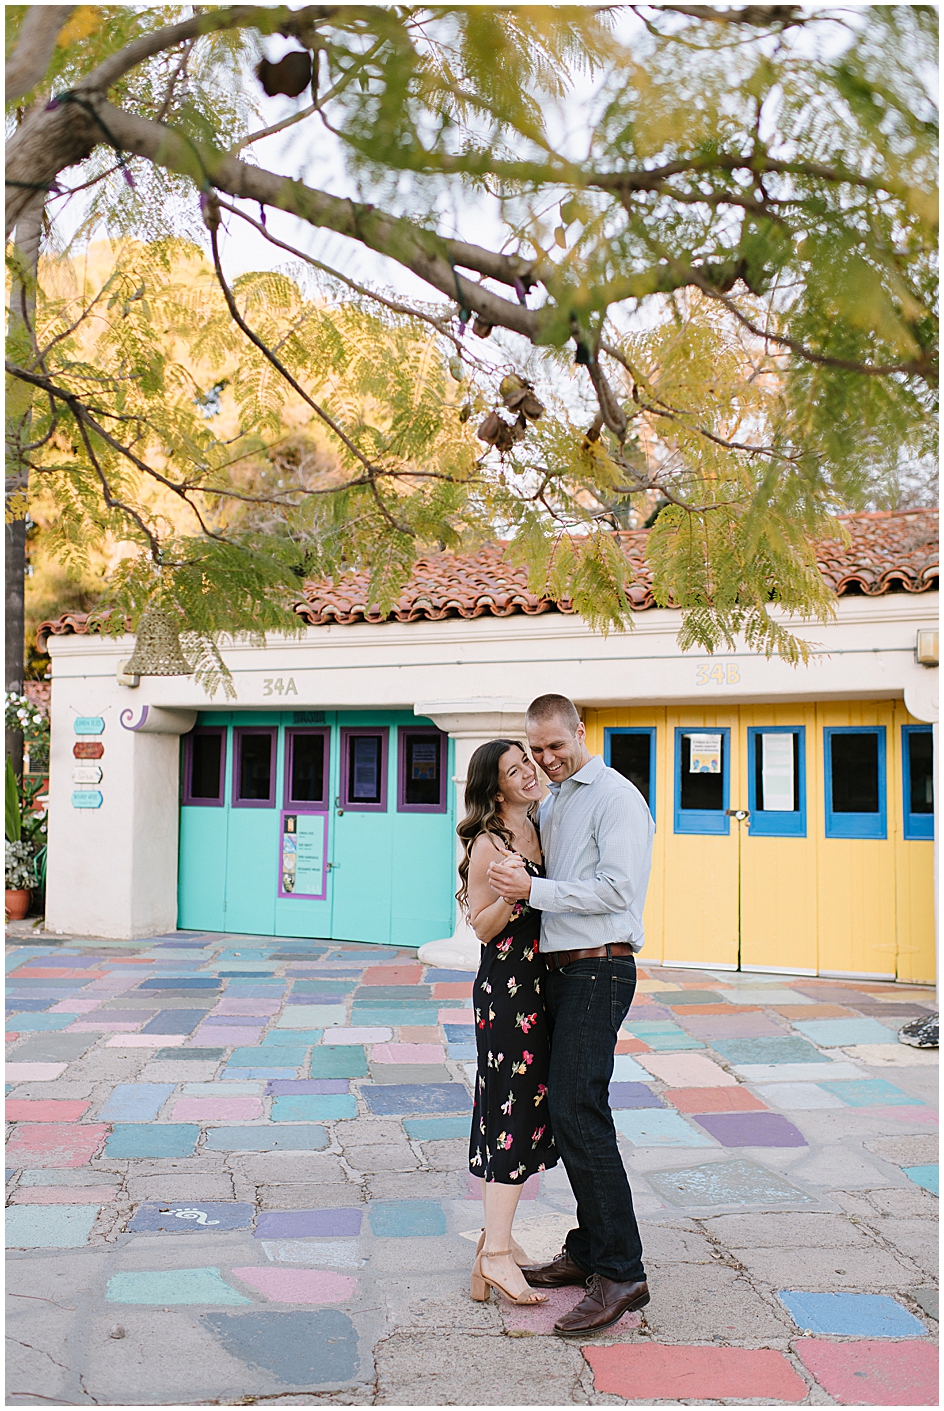 Young couple dancing under the tree in Spanish Village, Balaboa Park. Colorful painted floor stones below them. IN the background artist studios with yellow and turquoise doors.